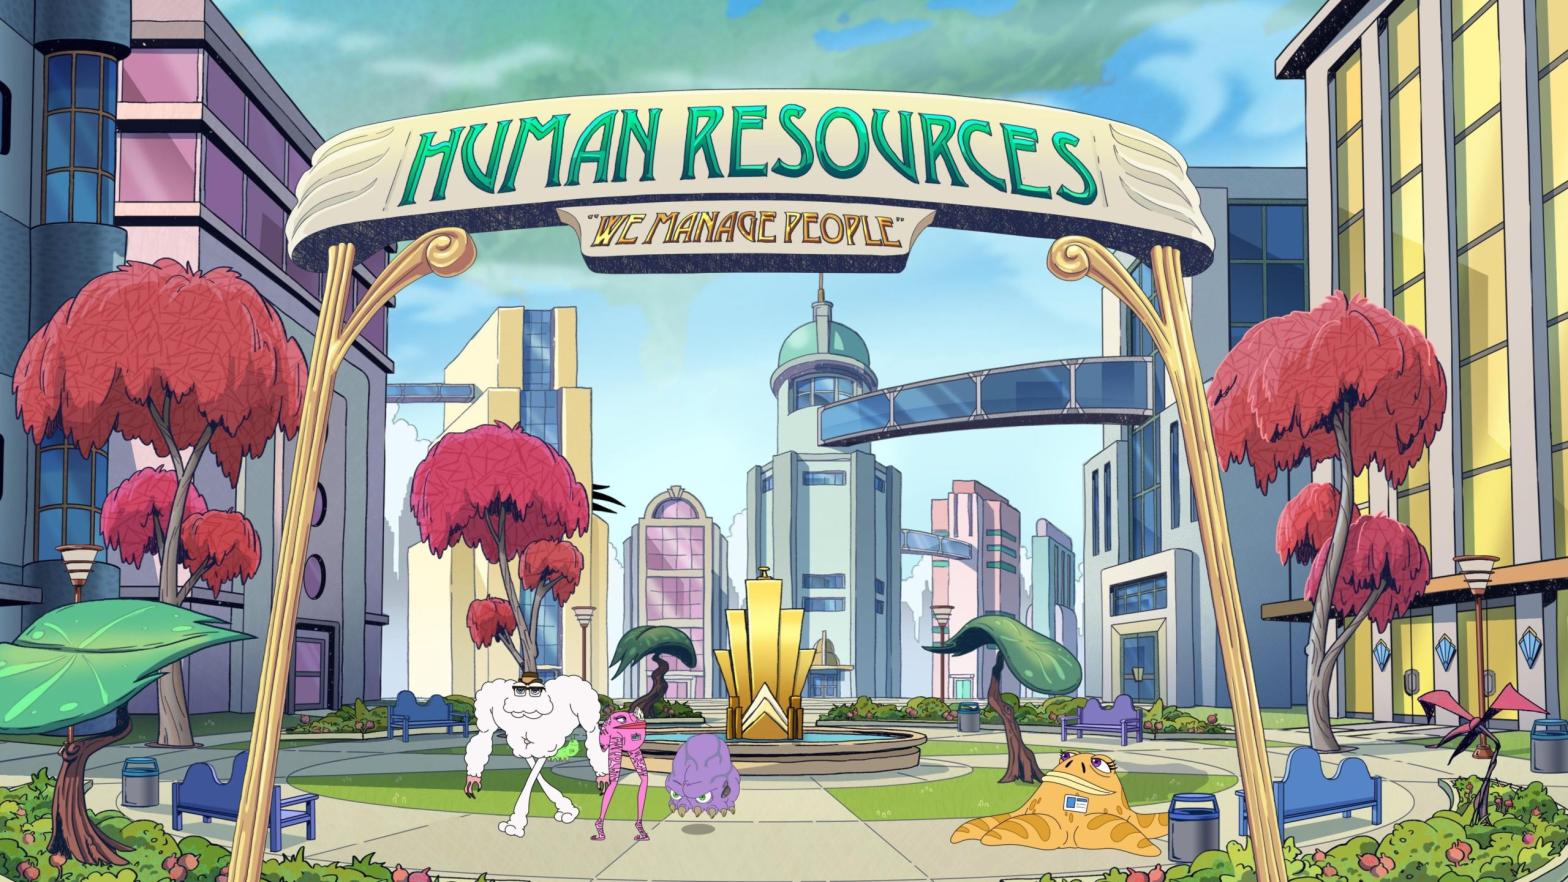 Welcome to Human Resources, which takes on a slightly different meaning here. (Image: Netflix)